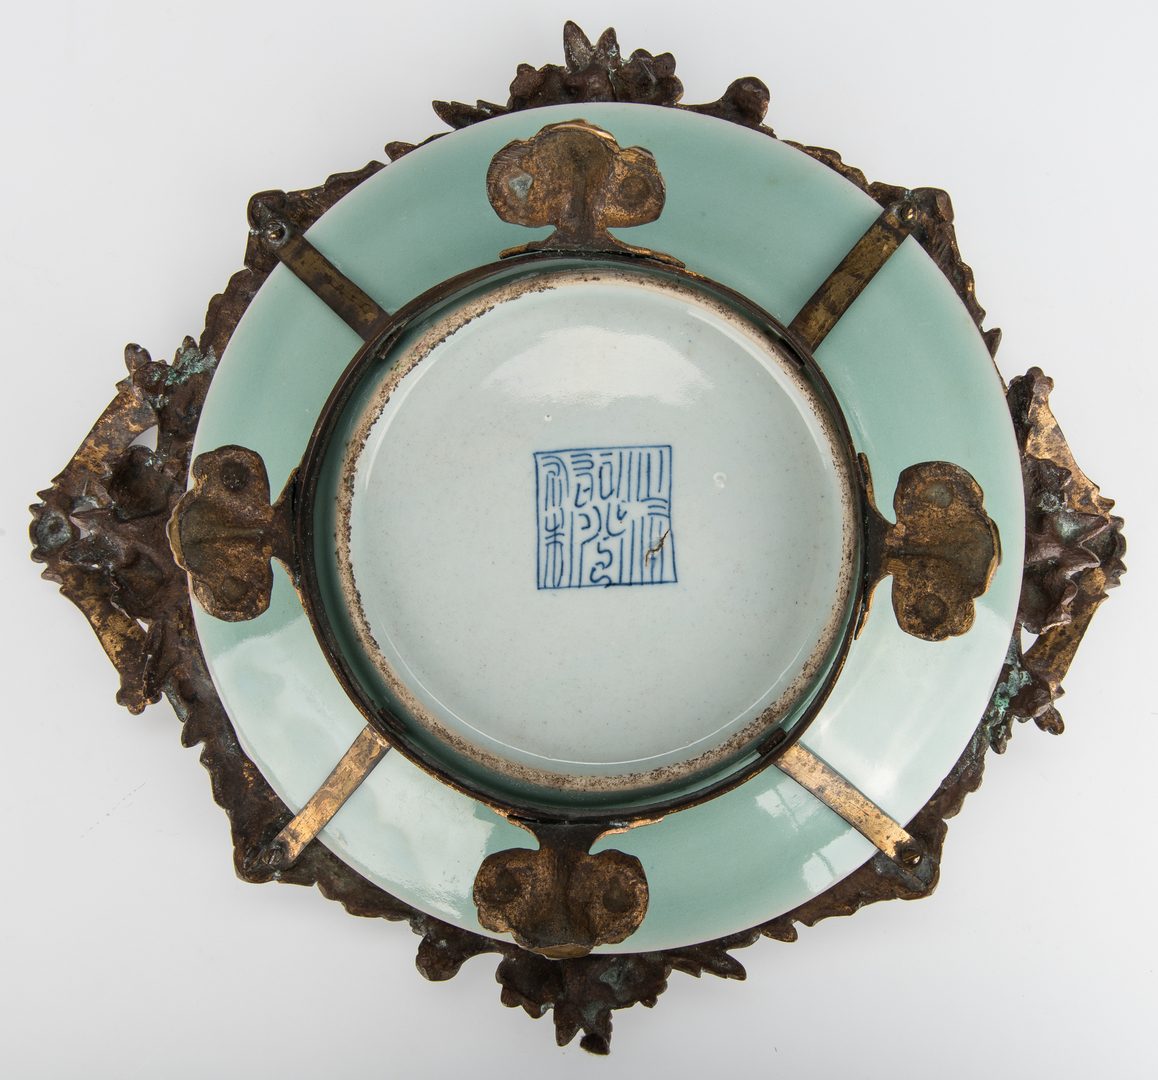 Lot 376: 2 Famille Rose Celadon Dishes, one with gilt bronze mounts